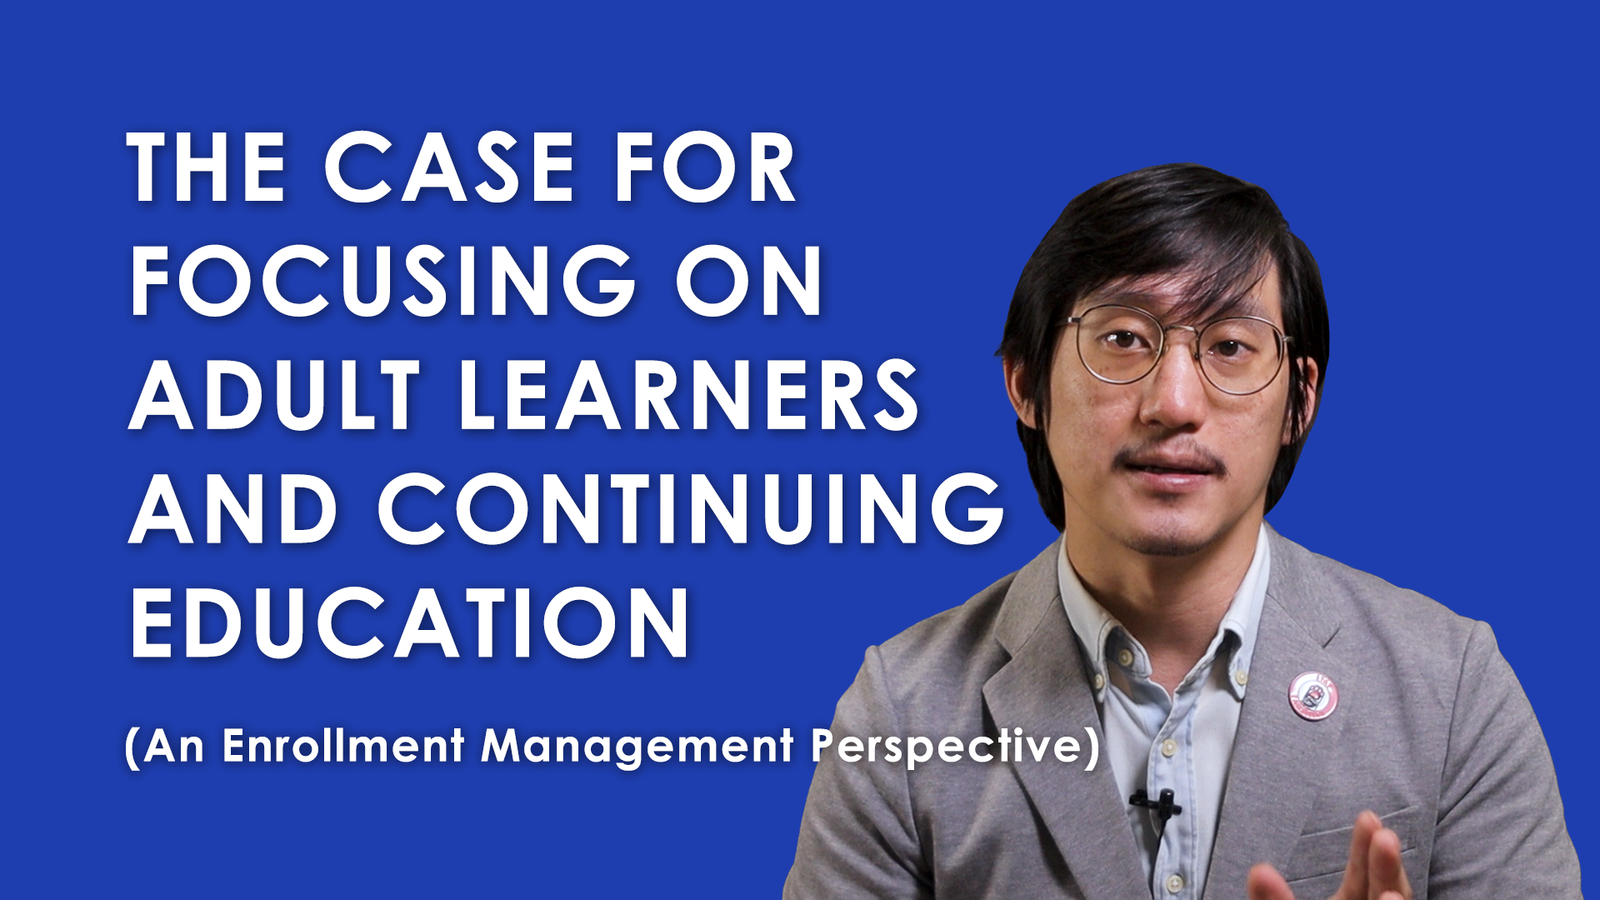 3 Reasons to Focus on Adult Learning (From an Enrollment Management Perspective)